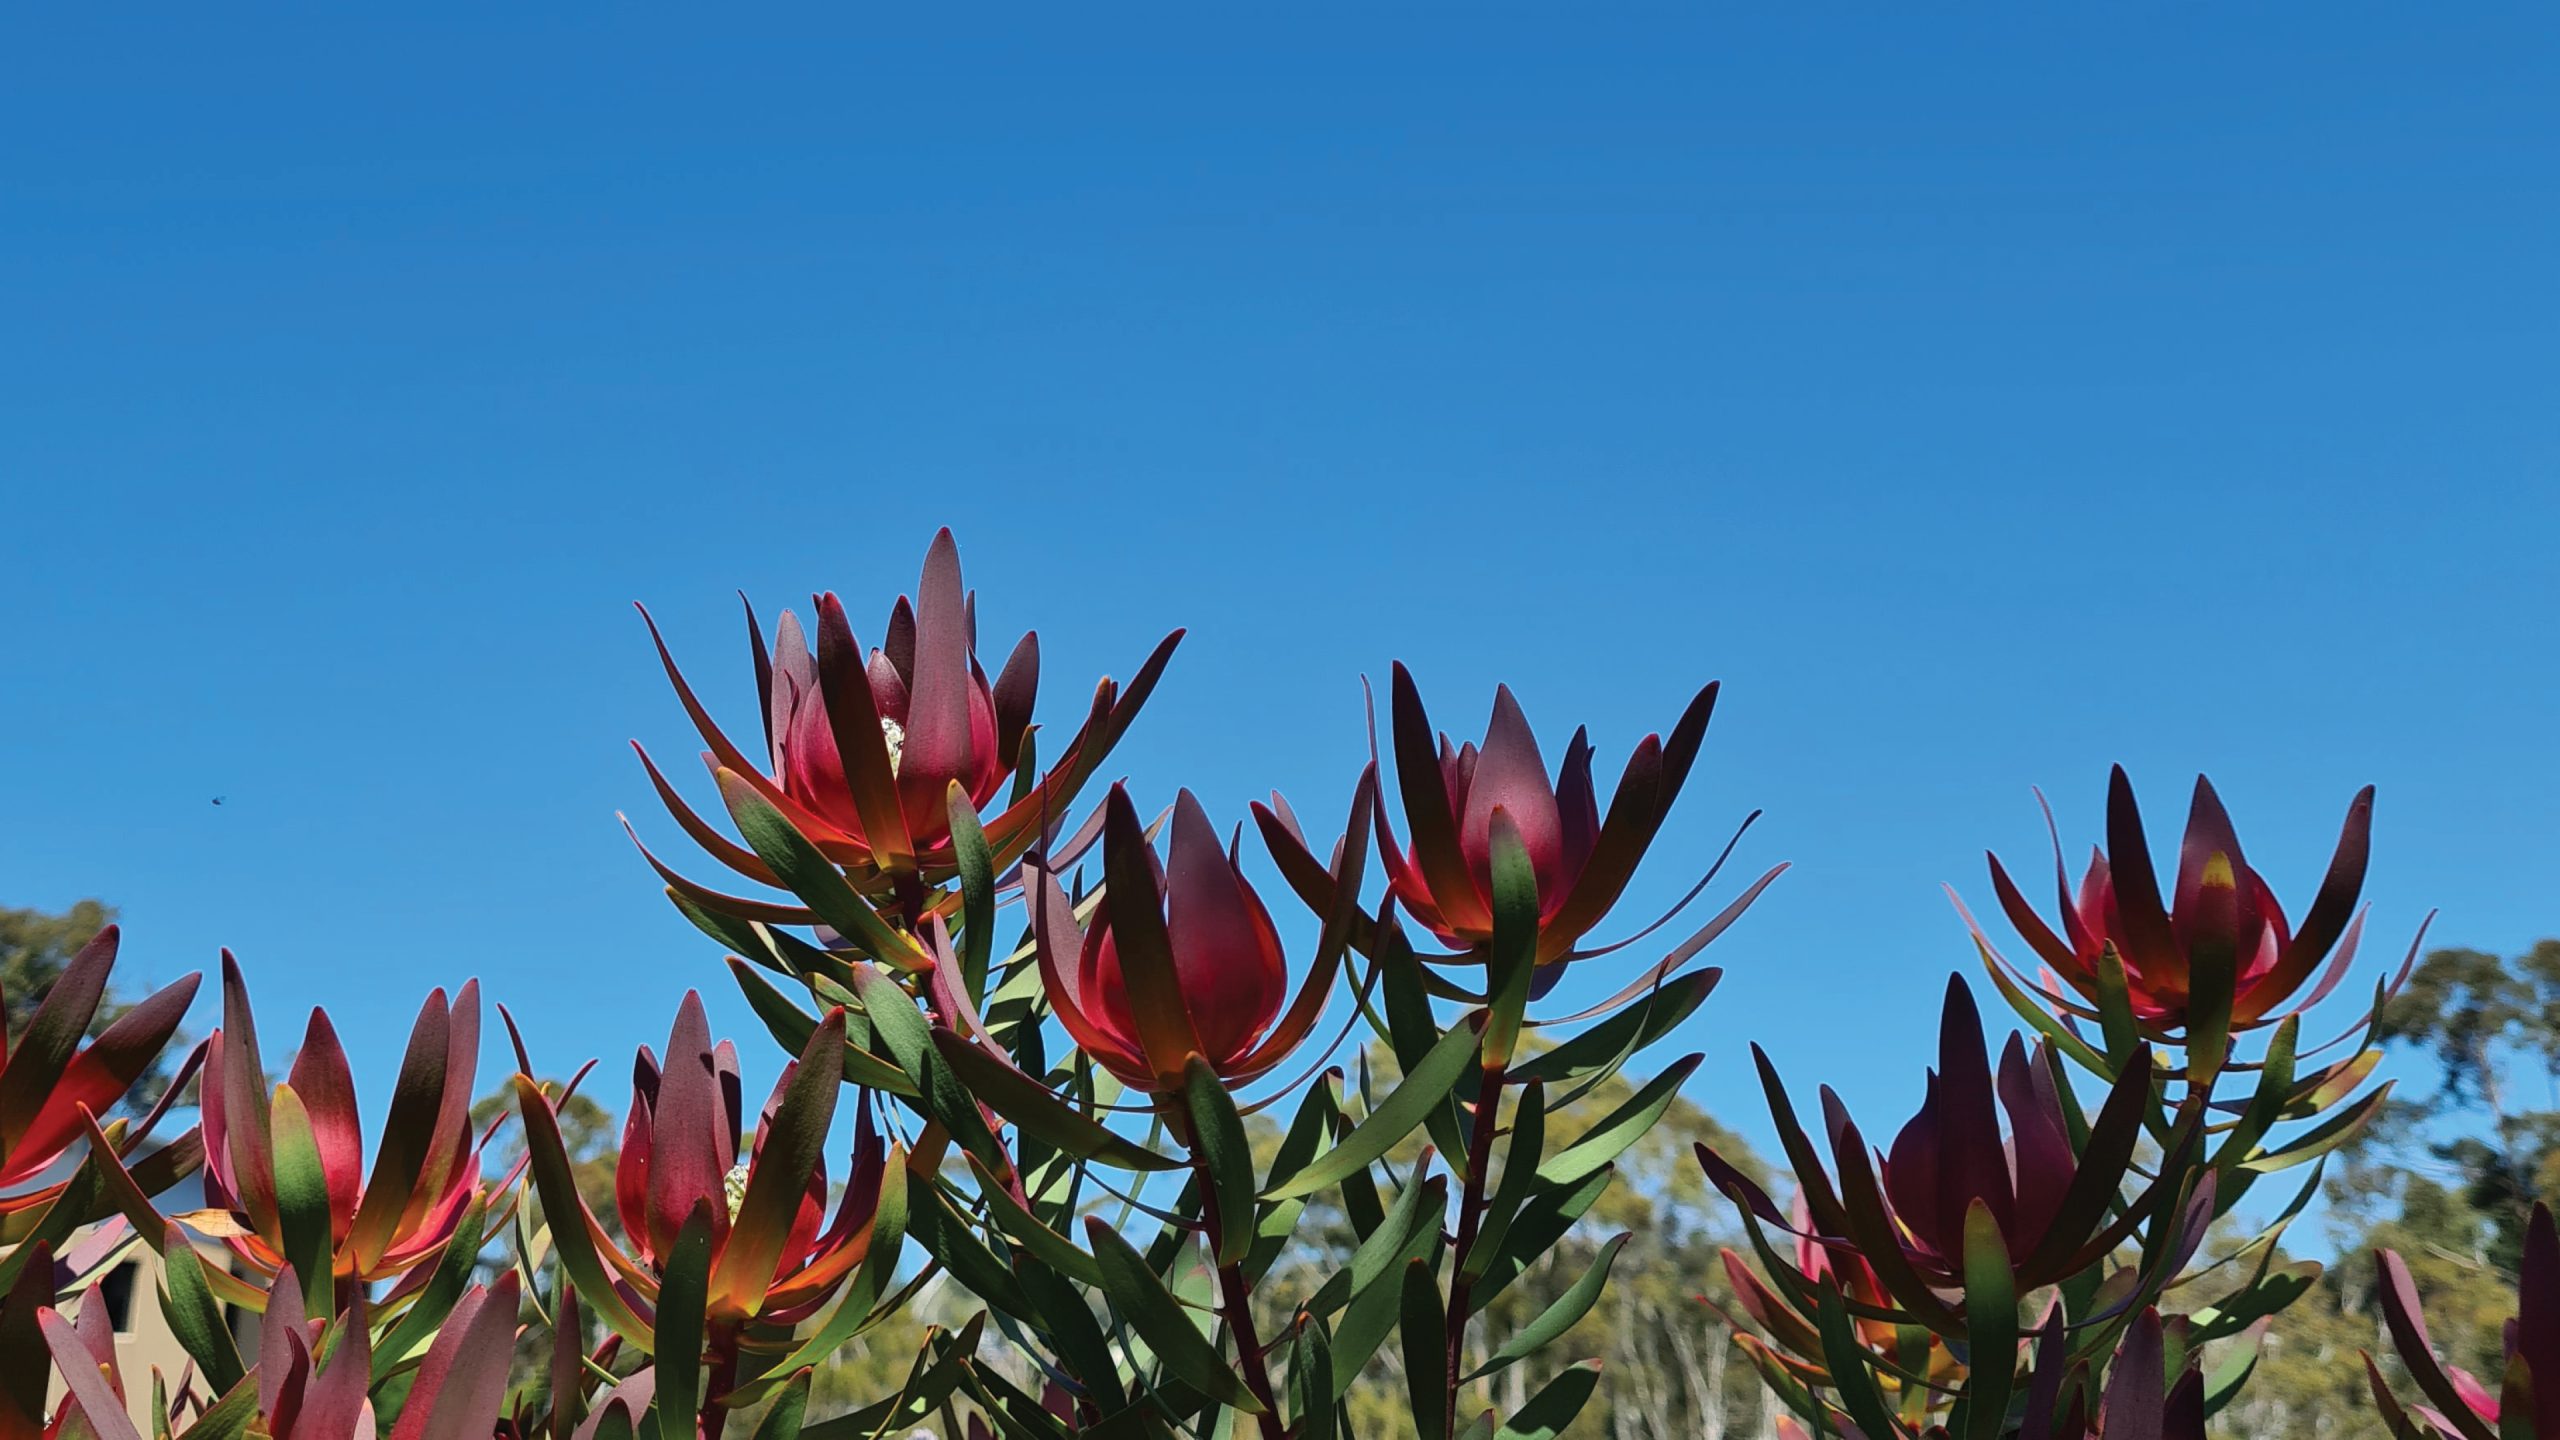 Australian native flowers with red heads and green leafy stalks in a field with a bright blue sky in the background.